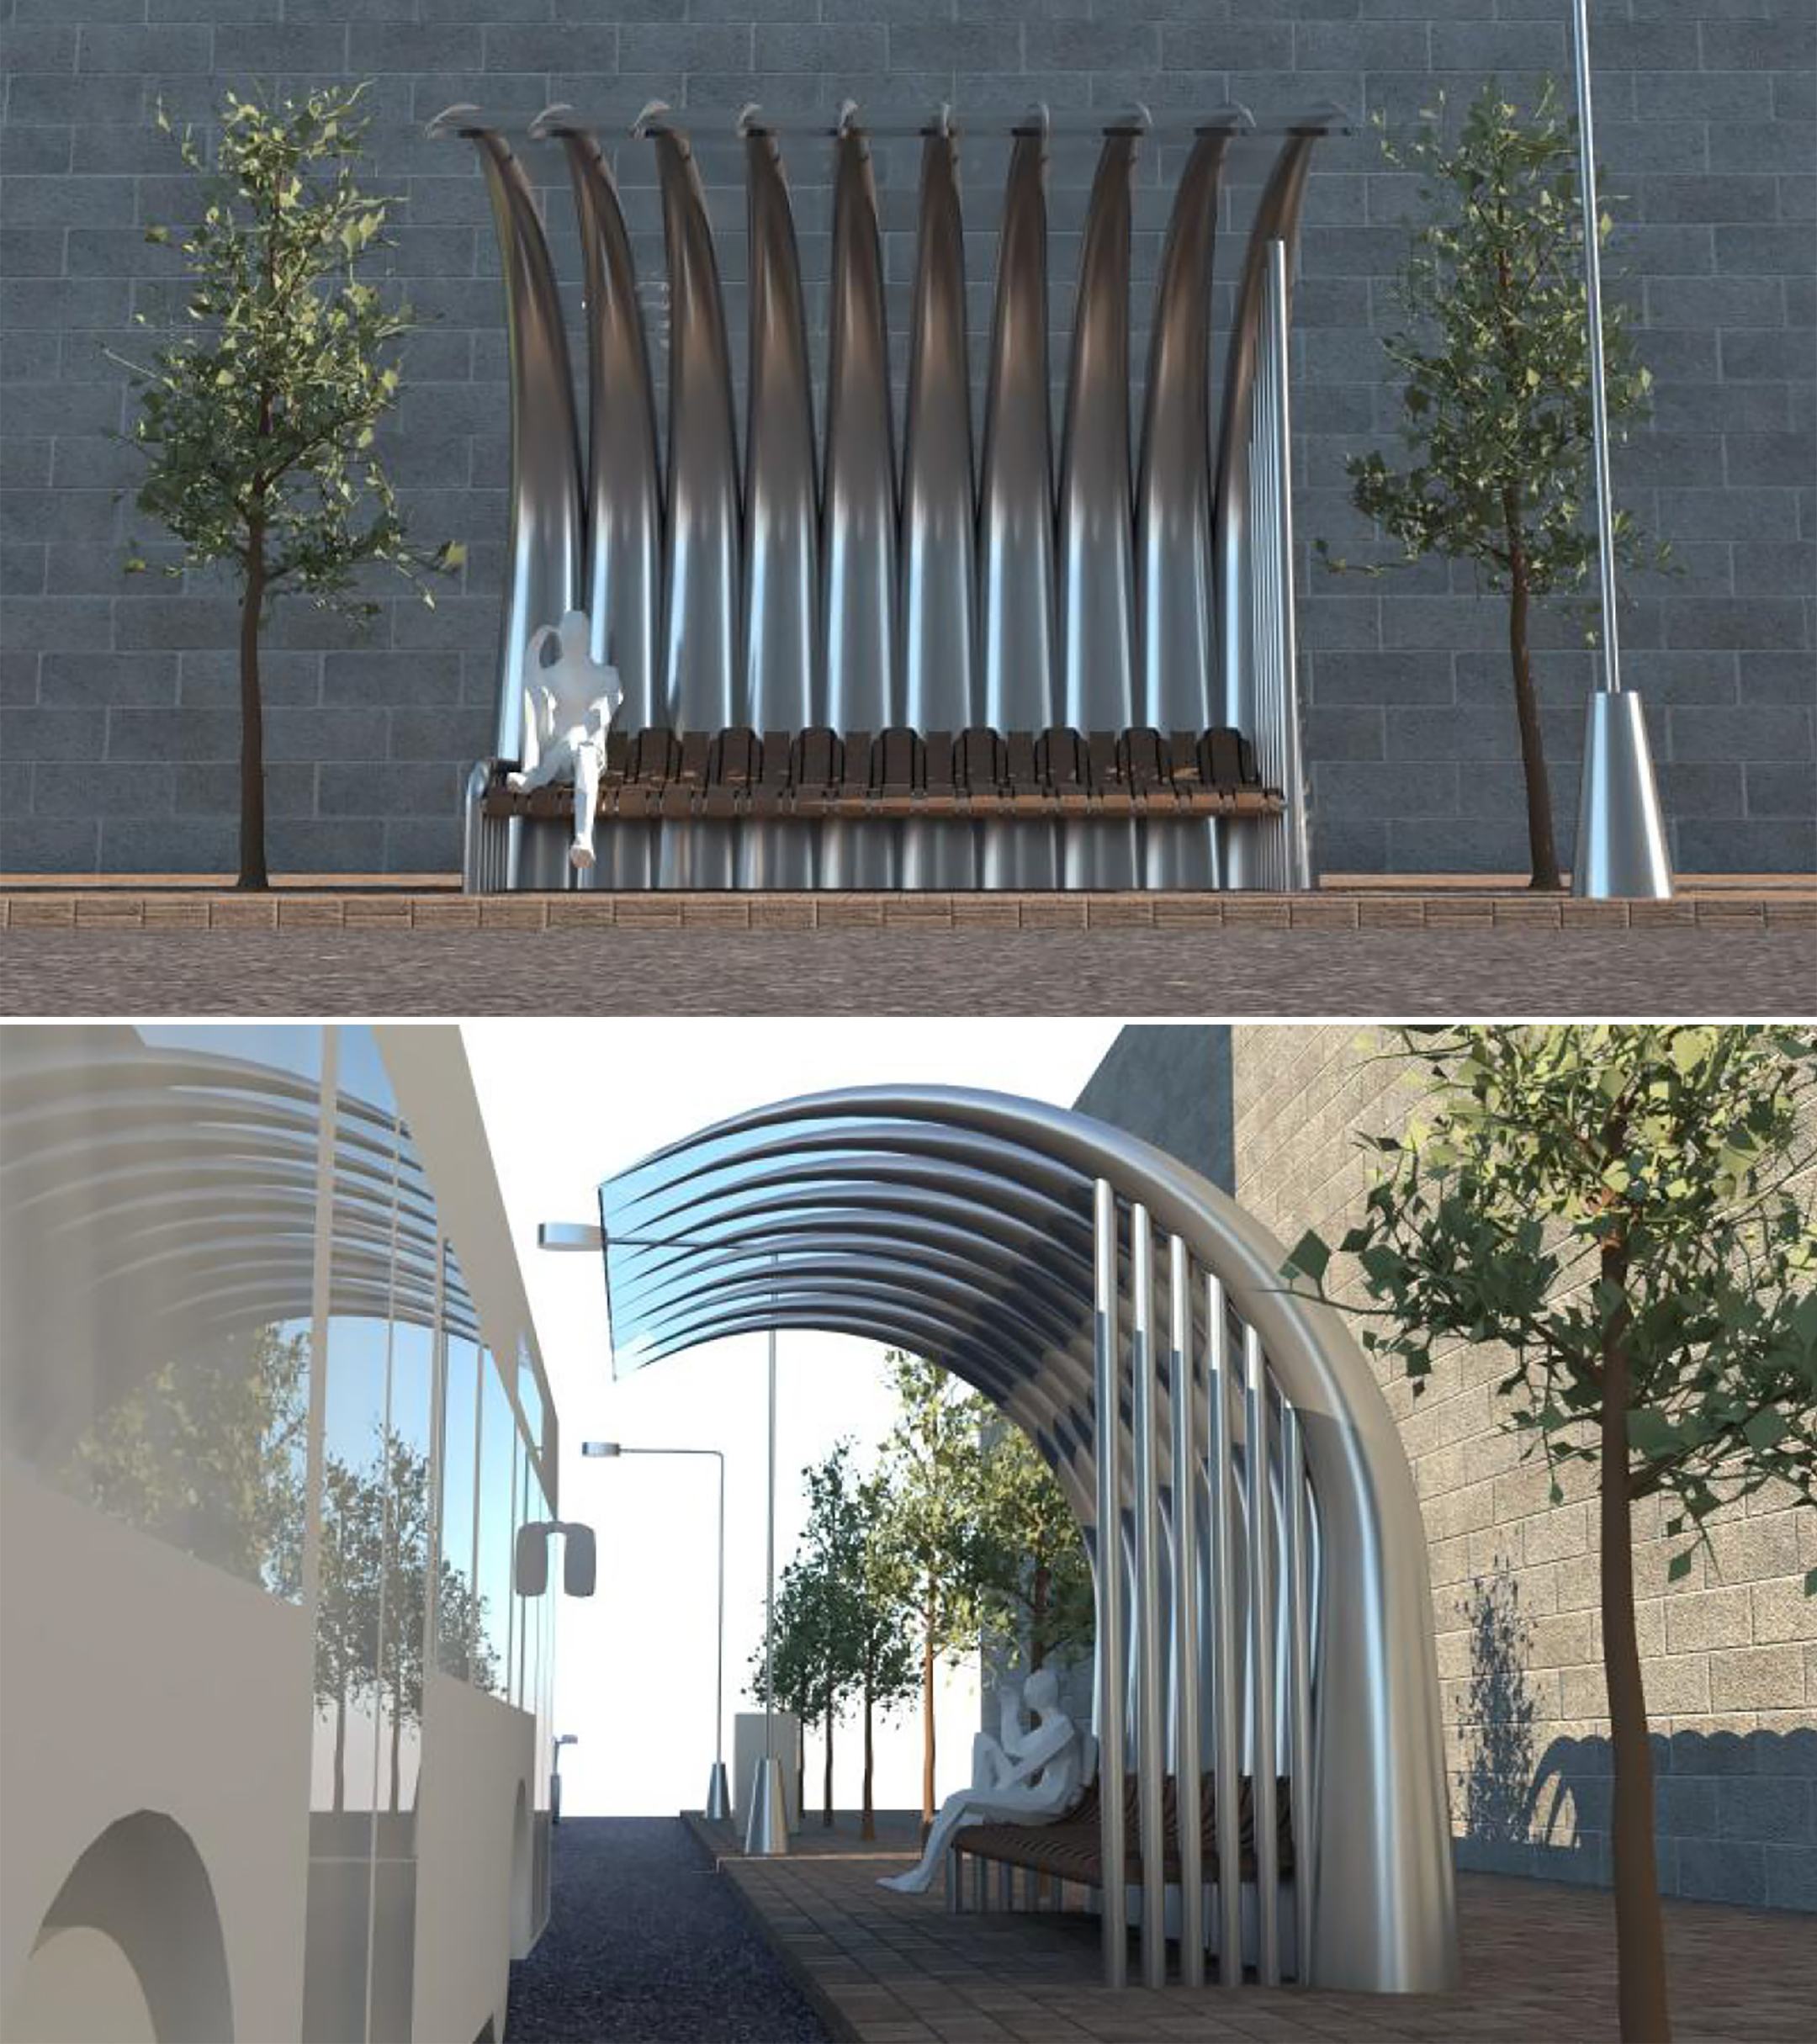 Two digital architectural renderings, one top of another, of a rib cage-shaped us stop